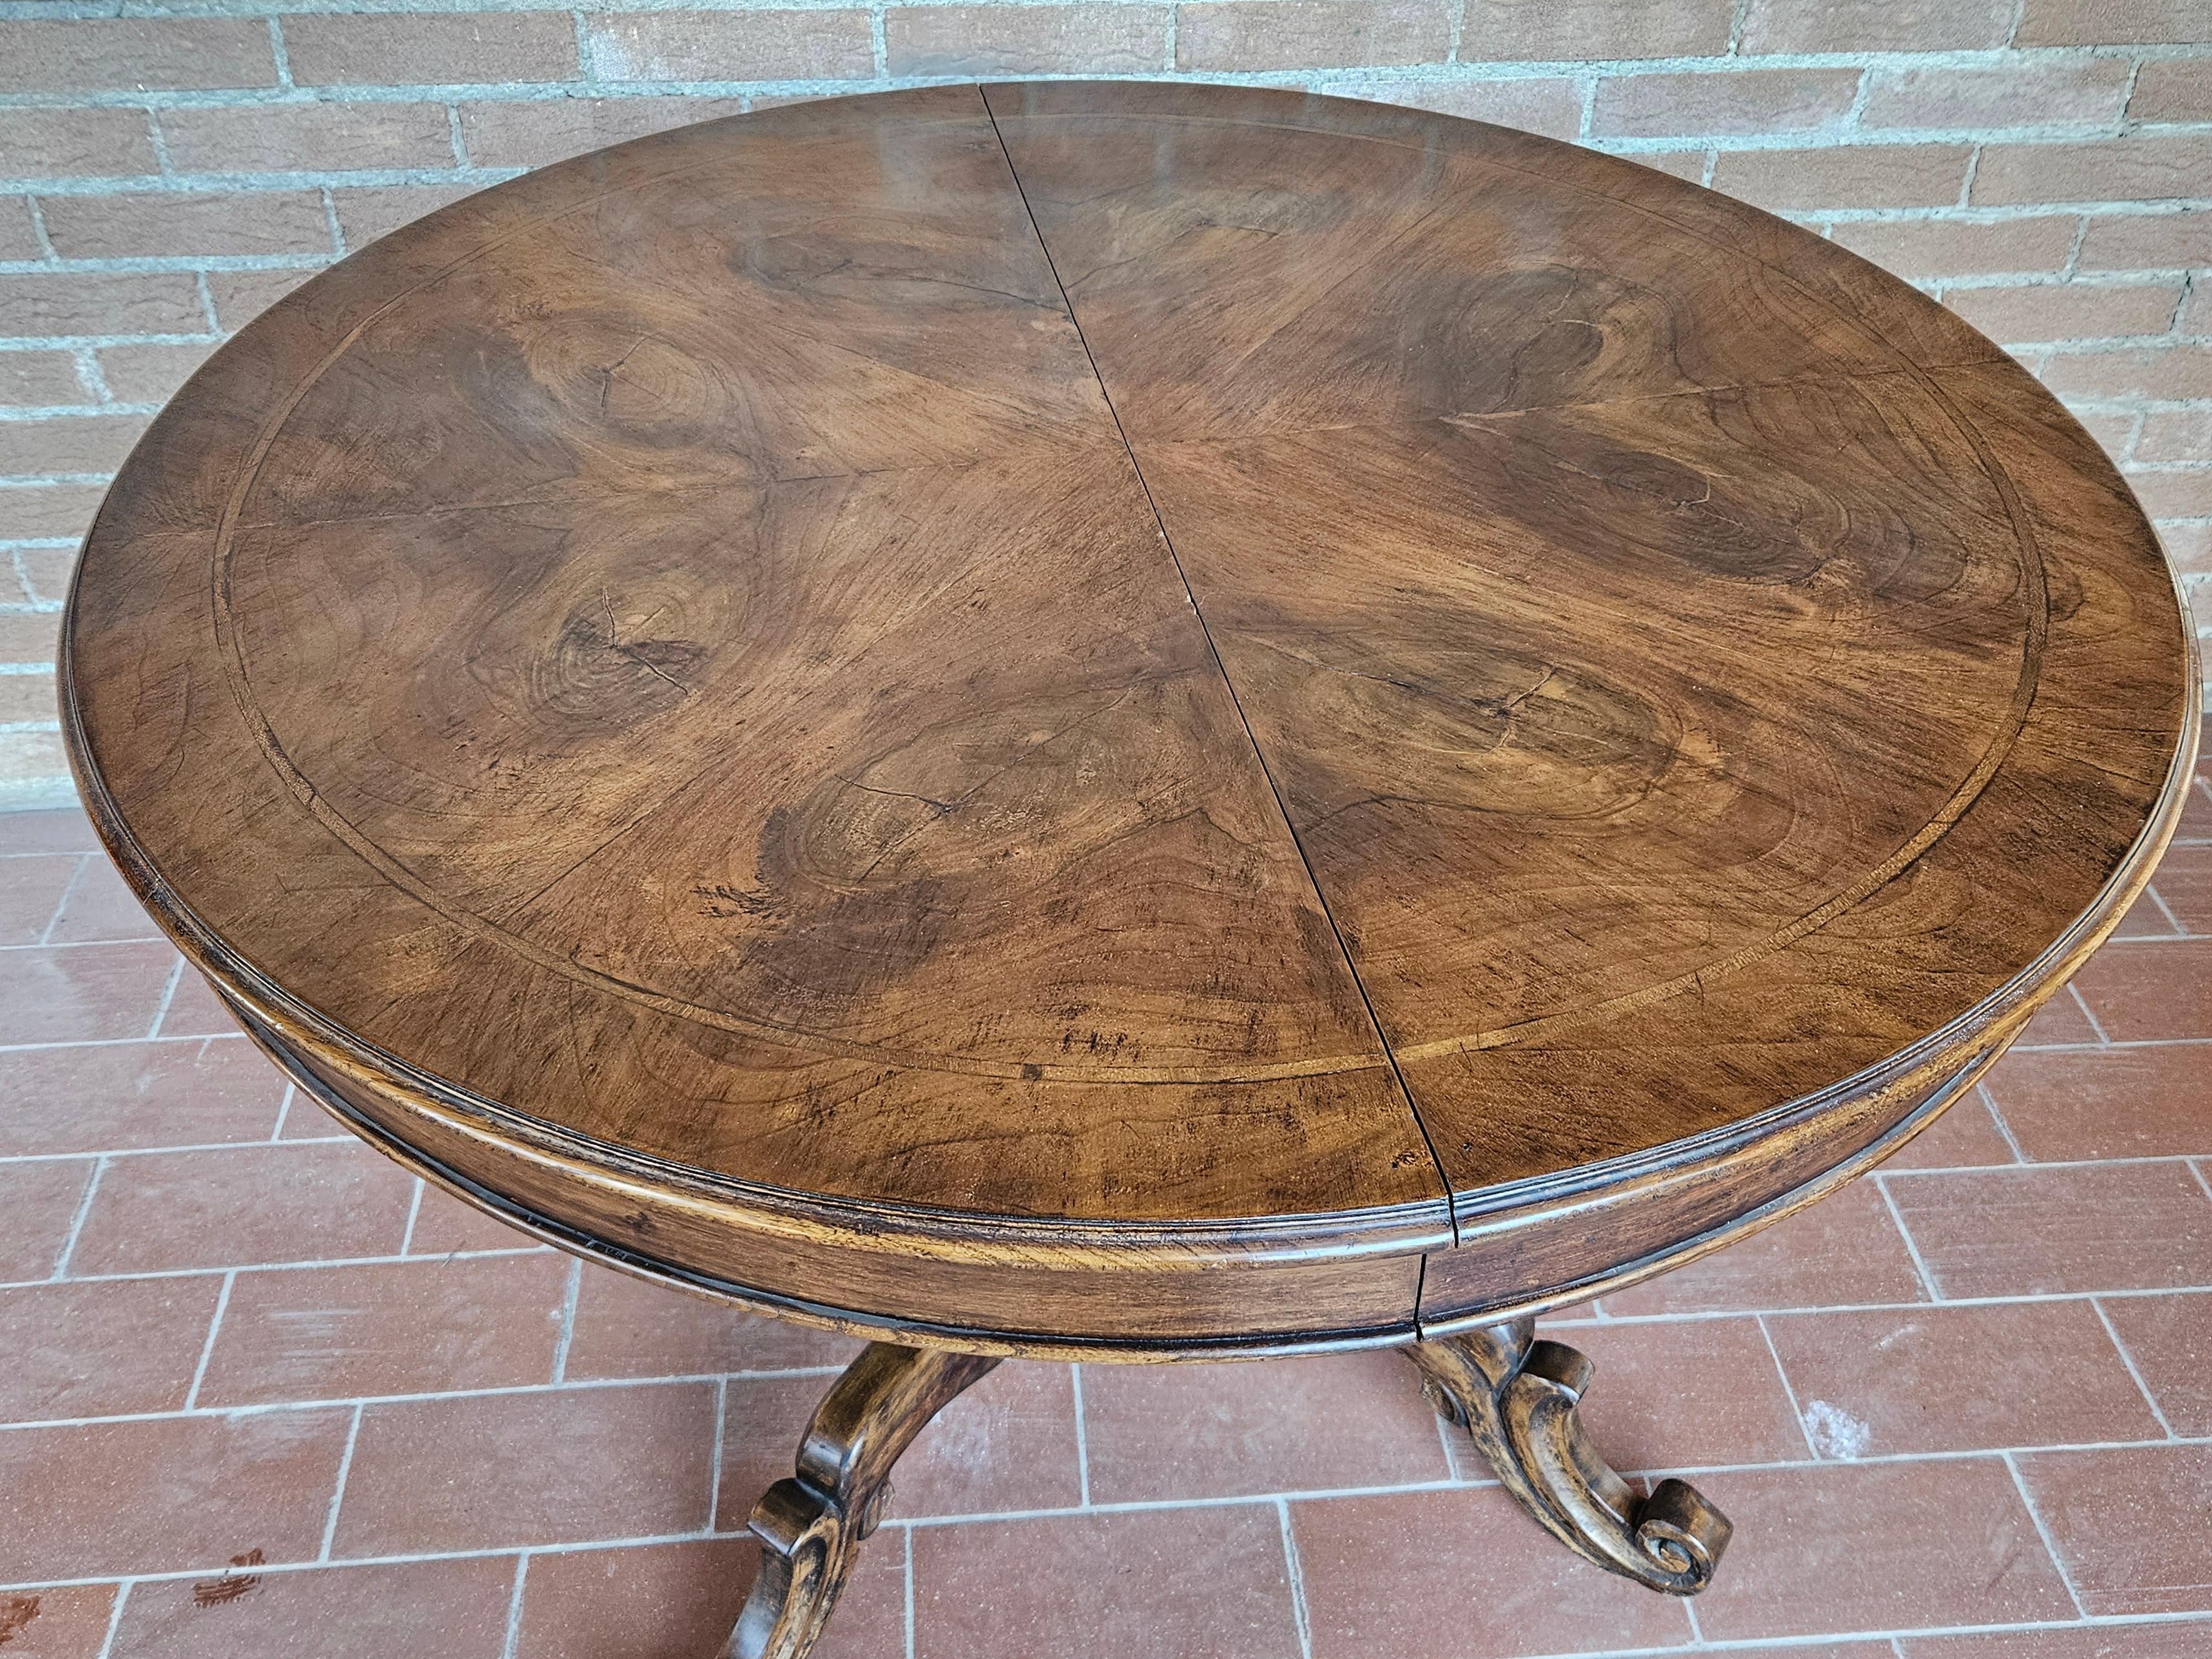 Elegant dining table from the early 1930s, Italian production of high quality and workmanship.

It features a walnut frame and a top covered in walnut burl, note the detailed and rich carvings and decorations along the base and perimeter.

The table